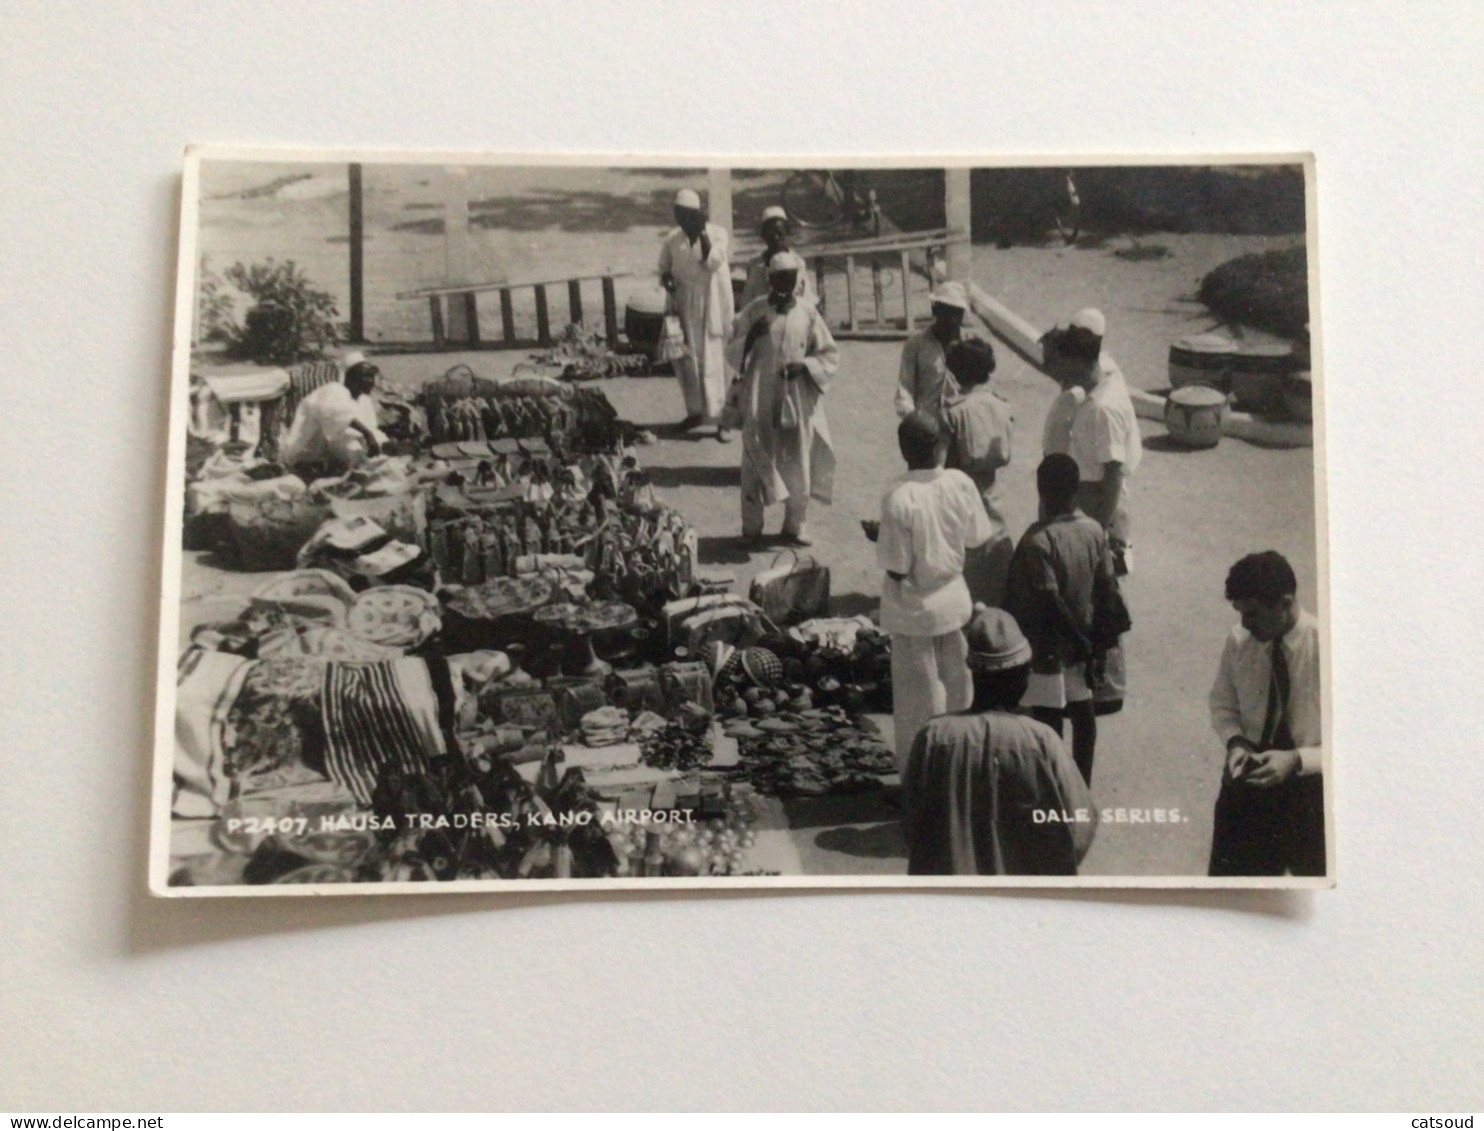 Carte Postale Ancienne (1956) Kano Airport Hausa Traders - Dale Series (with The Compliments Of SABENA) - Nigeria